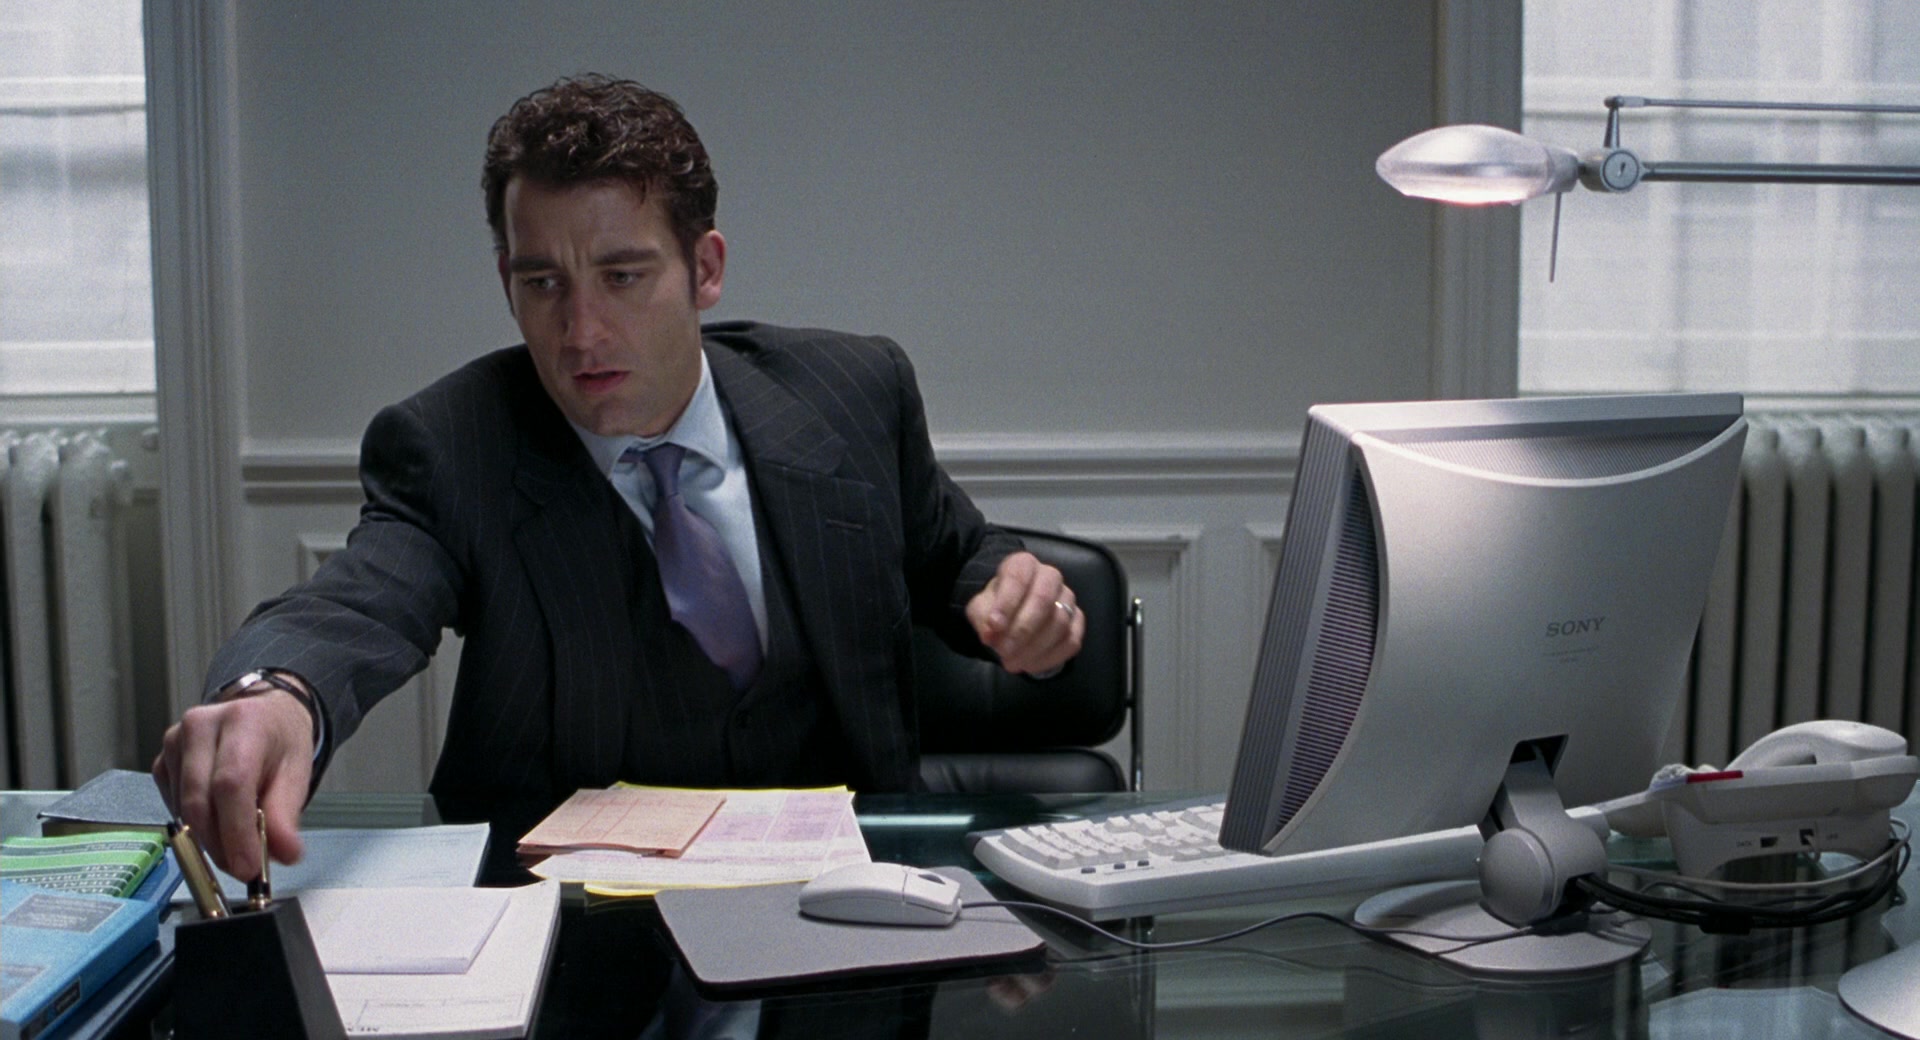 Sony All-In-One PC Used by Clive Owen in Closer (2004) Movie1920 x 1040